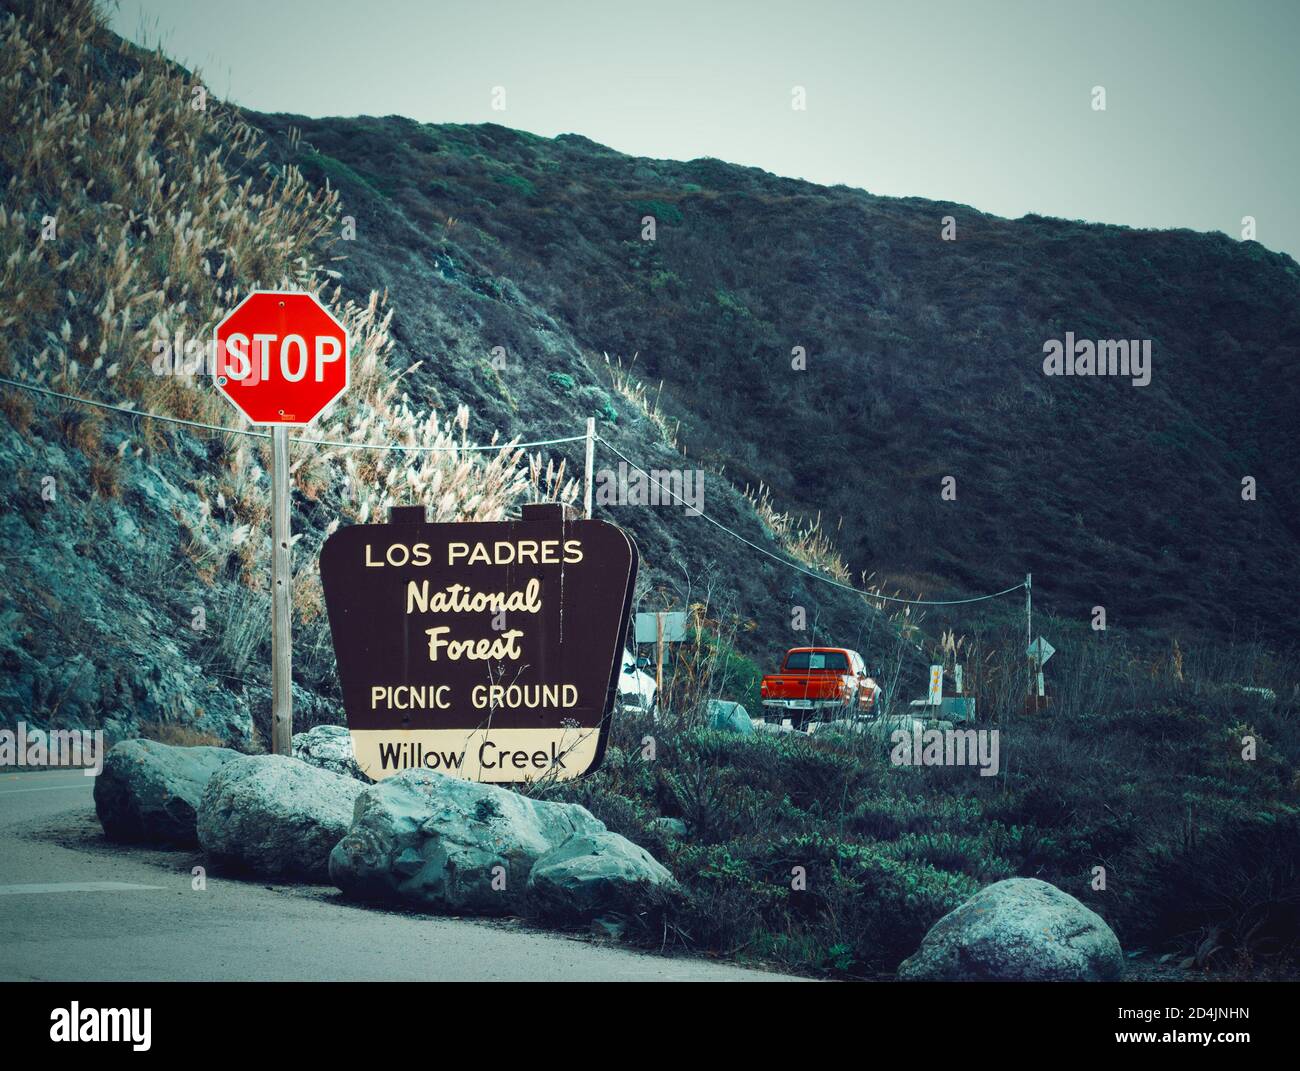 Los Padres National Forest sign in California, USA Stock Photo